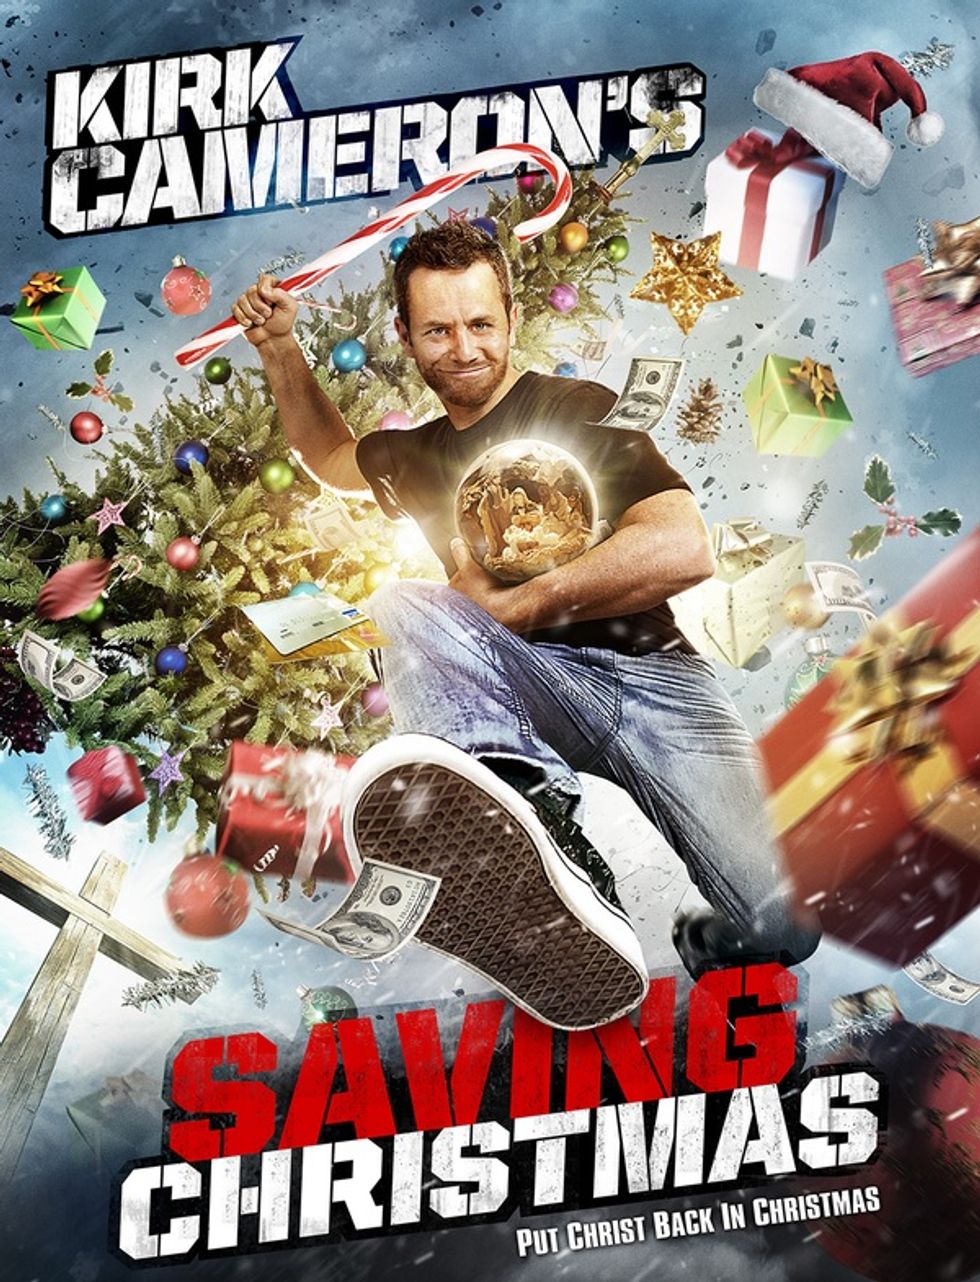 Is 'Kirk Cameron's Saving Christmas' Truly The Worst Movie Ever? A Wonkette Investigation